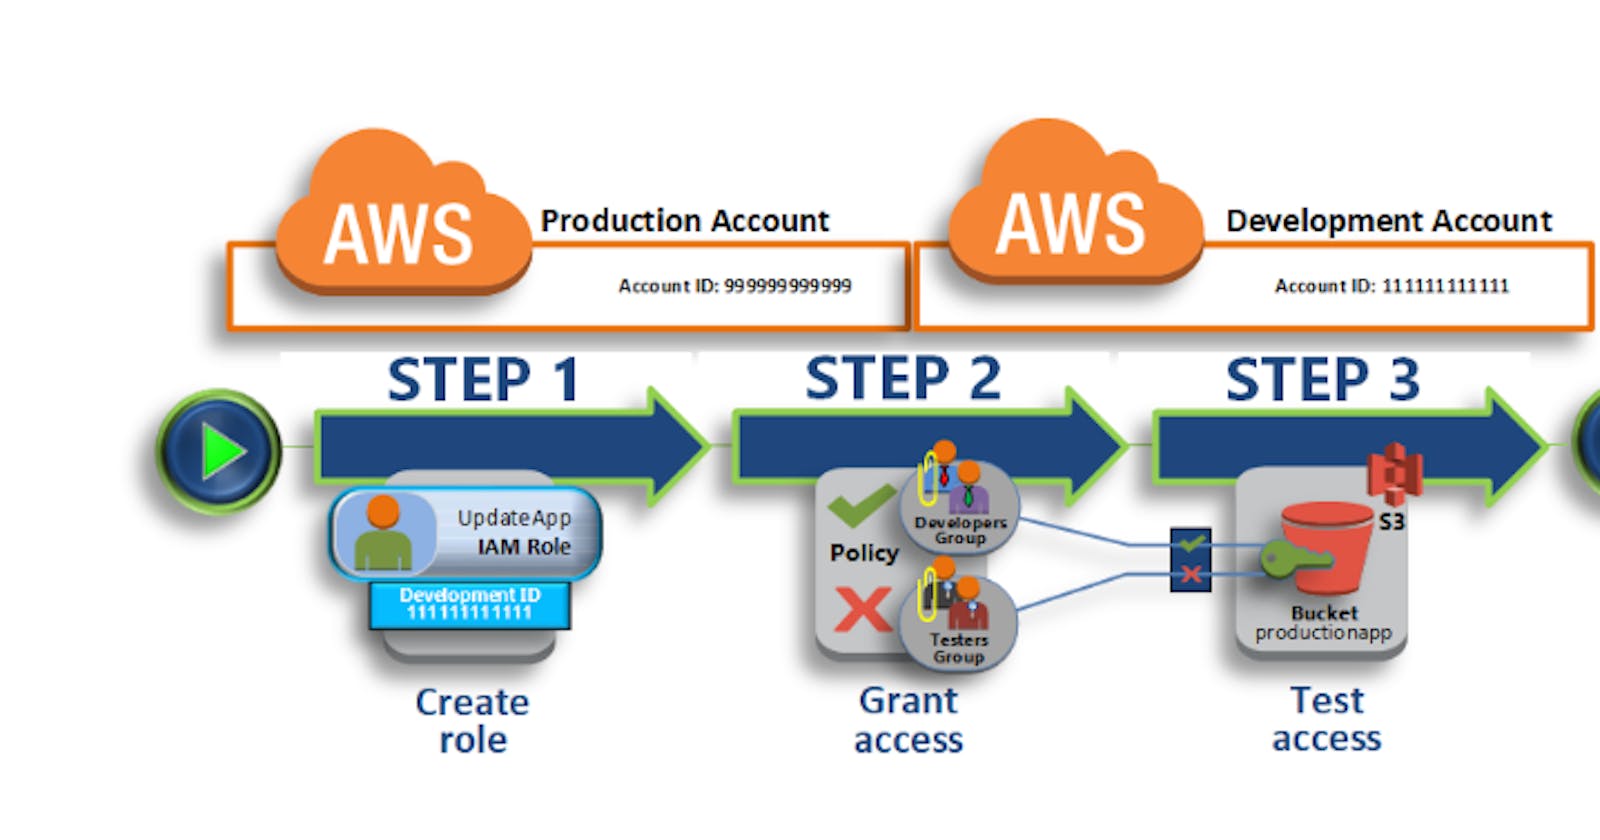 AWS IAM (Identity and Access Management)